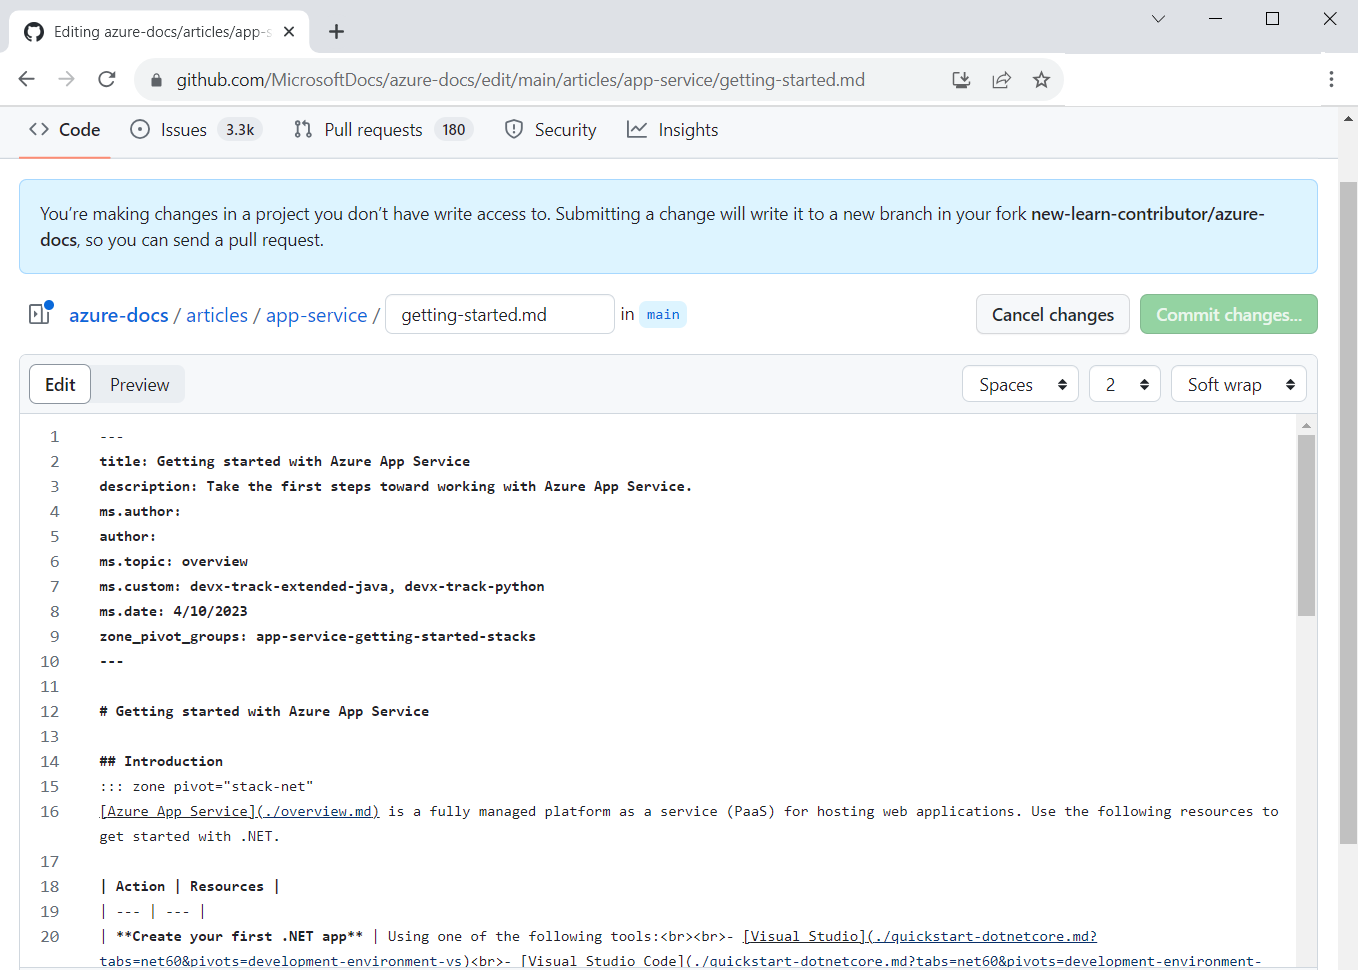 Screenshot of a browser with a documentation article written in Markdown syntax, which can be edited in the Edit pane.